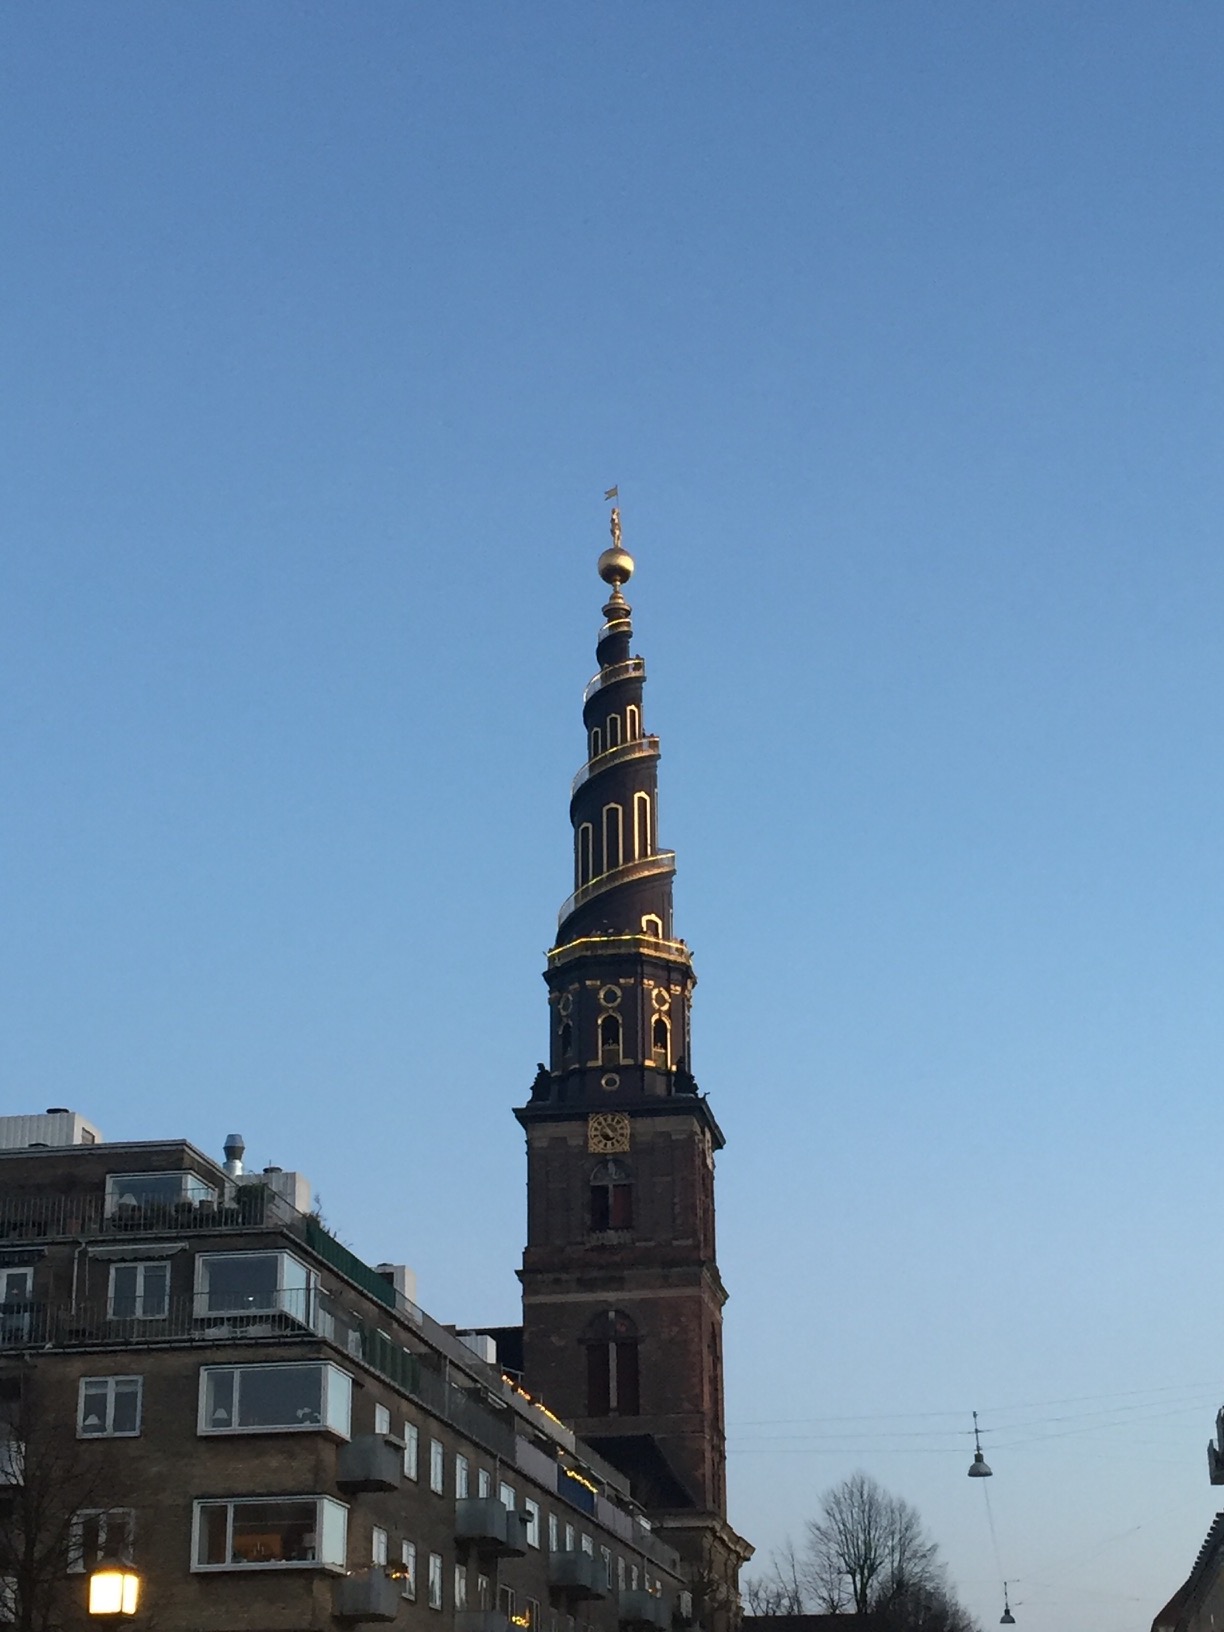 A black spiral spire trimmed with gold atop a stone tower.